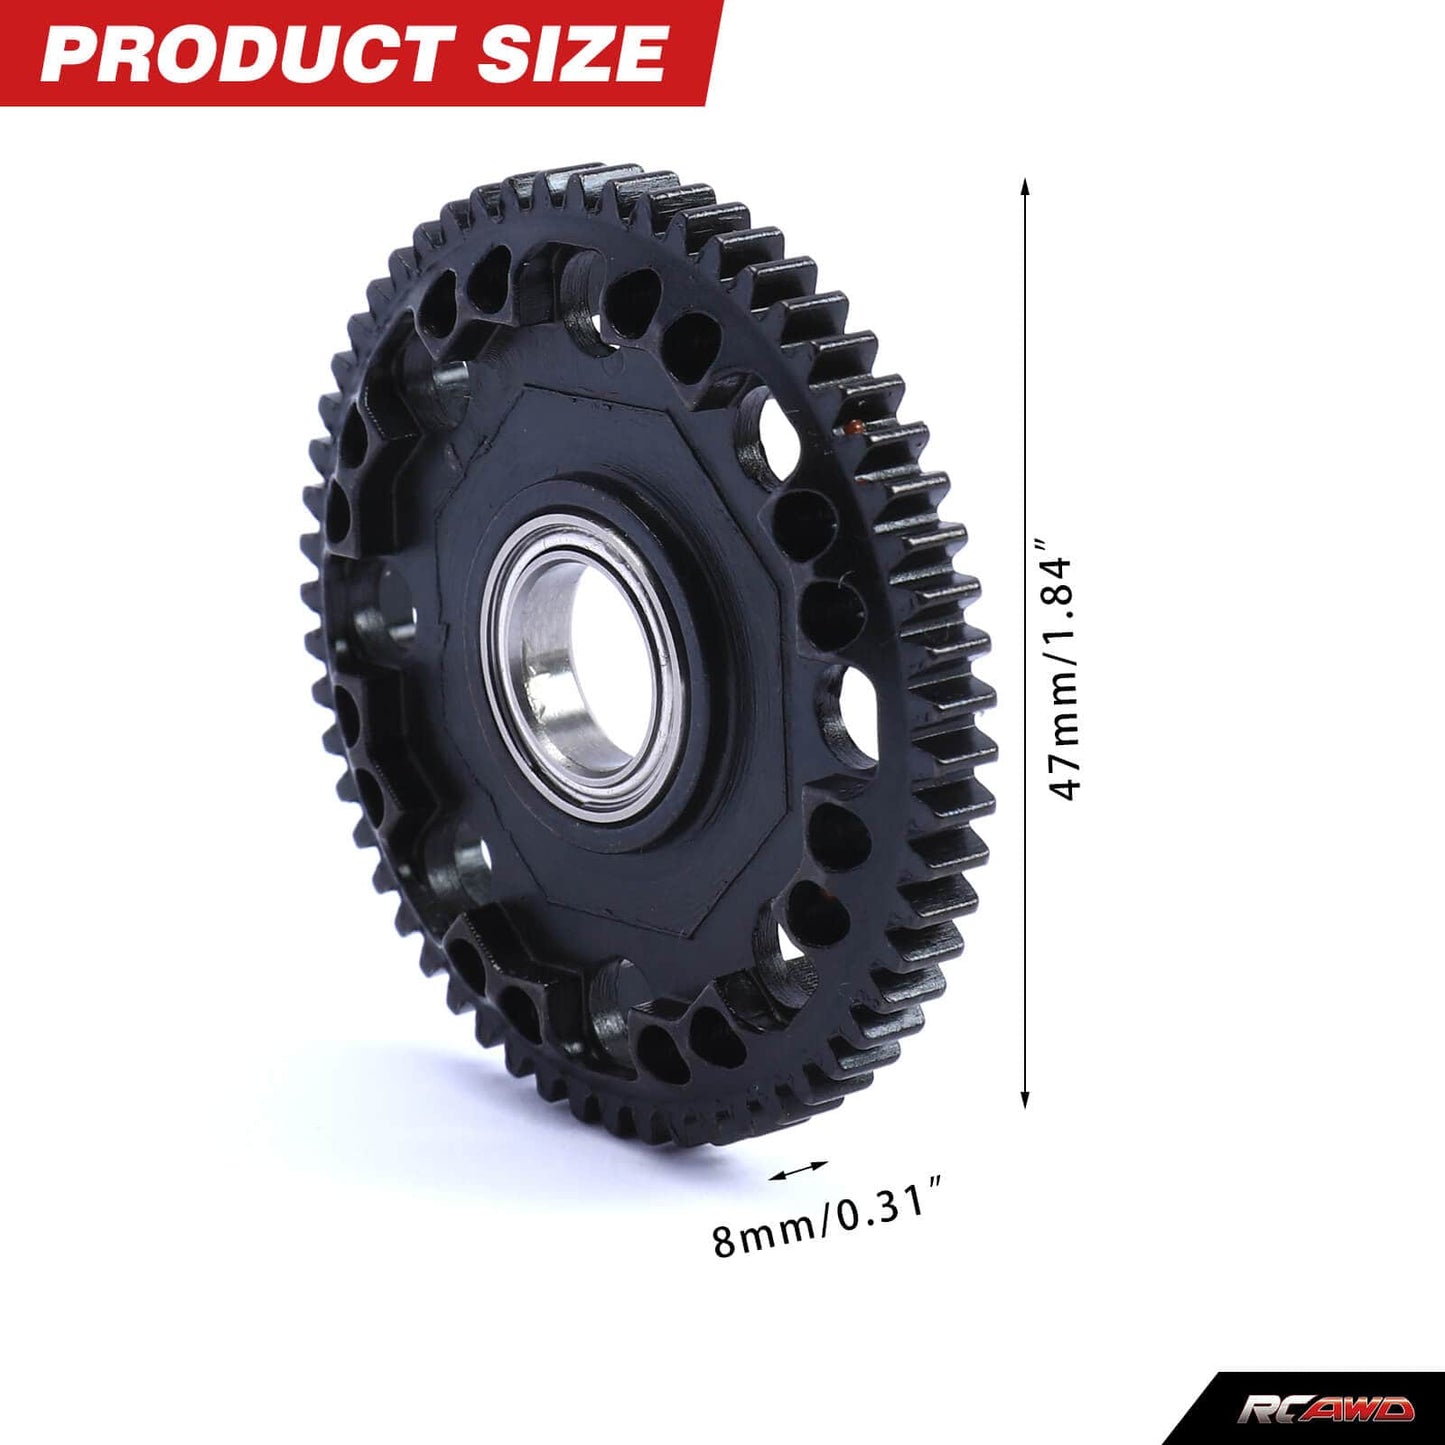 RCAWD ARRMA 3S RCAWD arrma 3s Upgrade Steel 57T 0.8Mod Spur Gear with Bearing